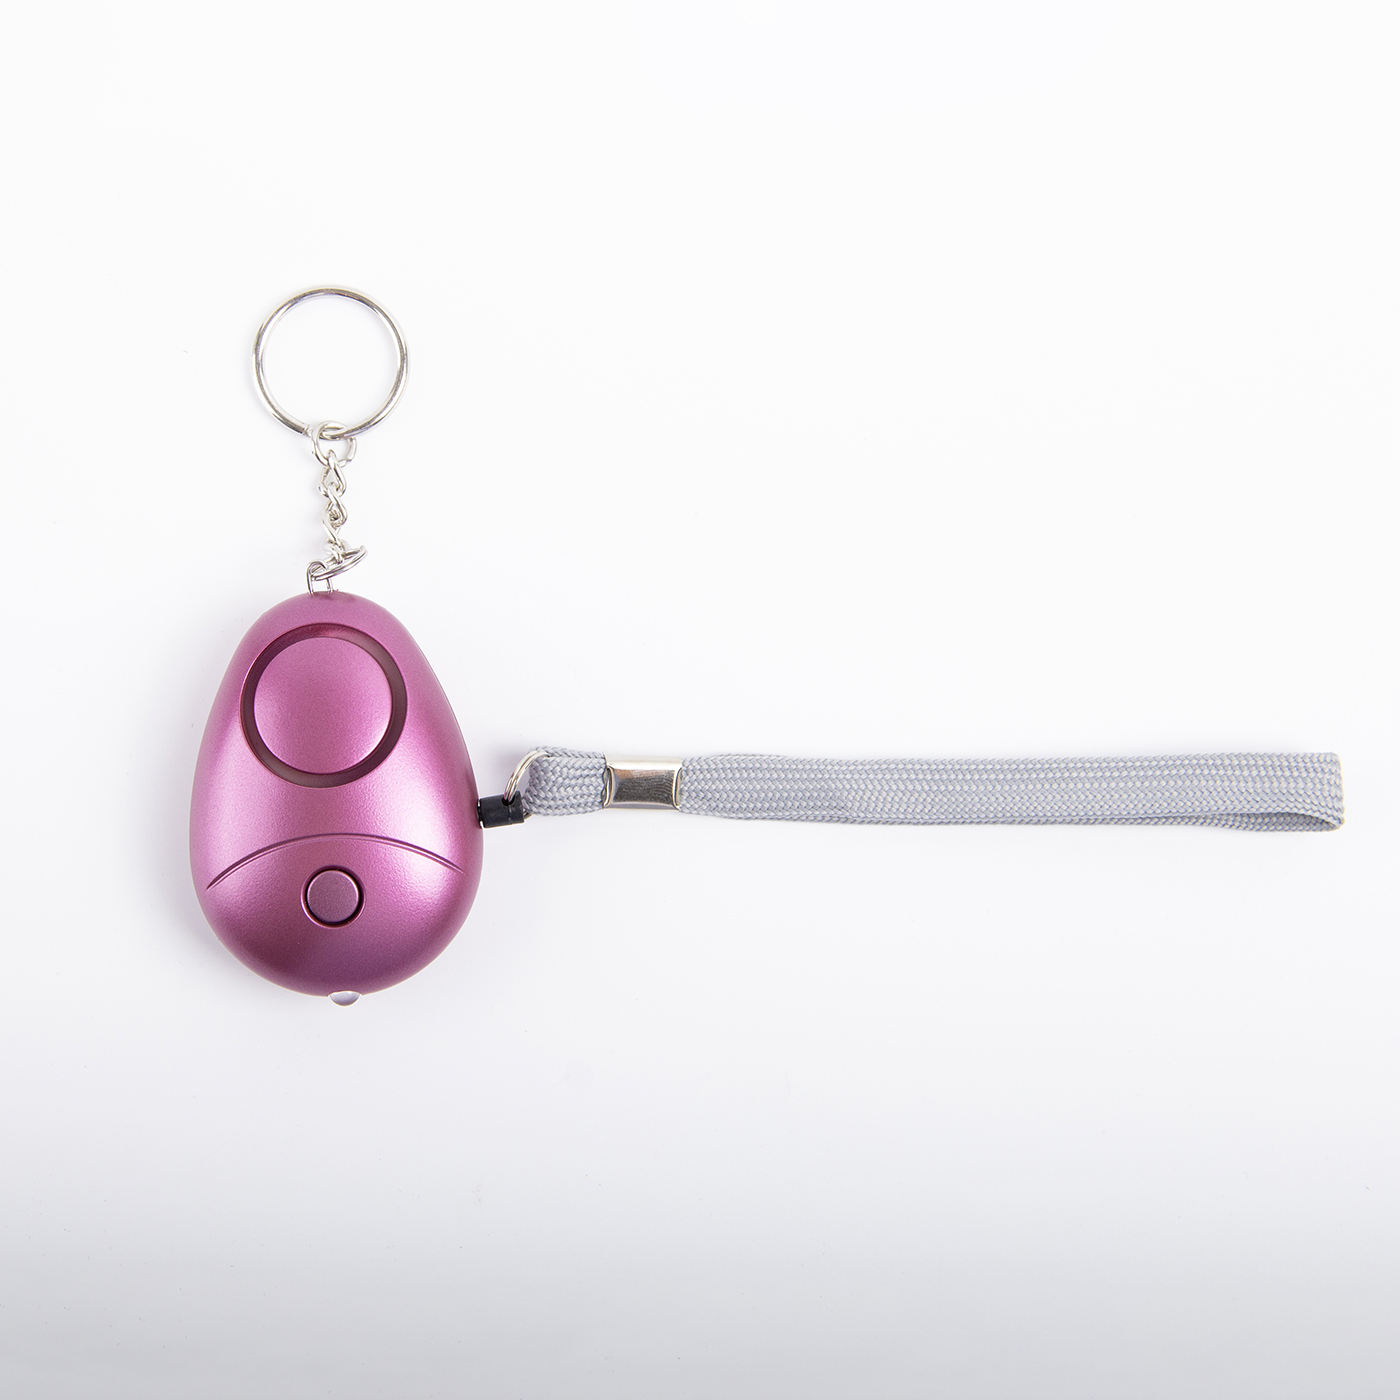 Personal Security Alarm Keychain With LED Light4